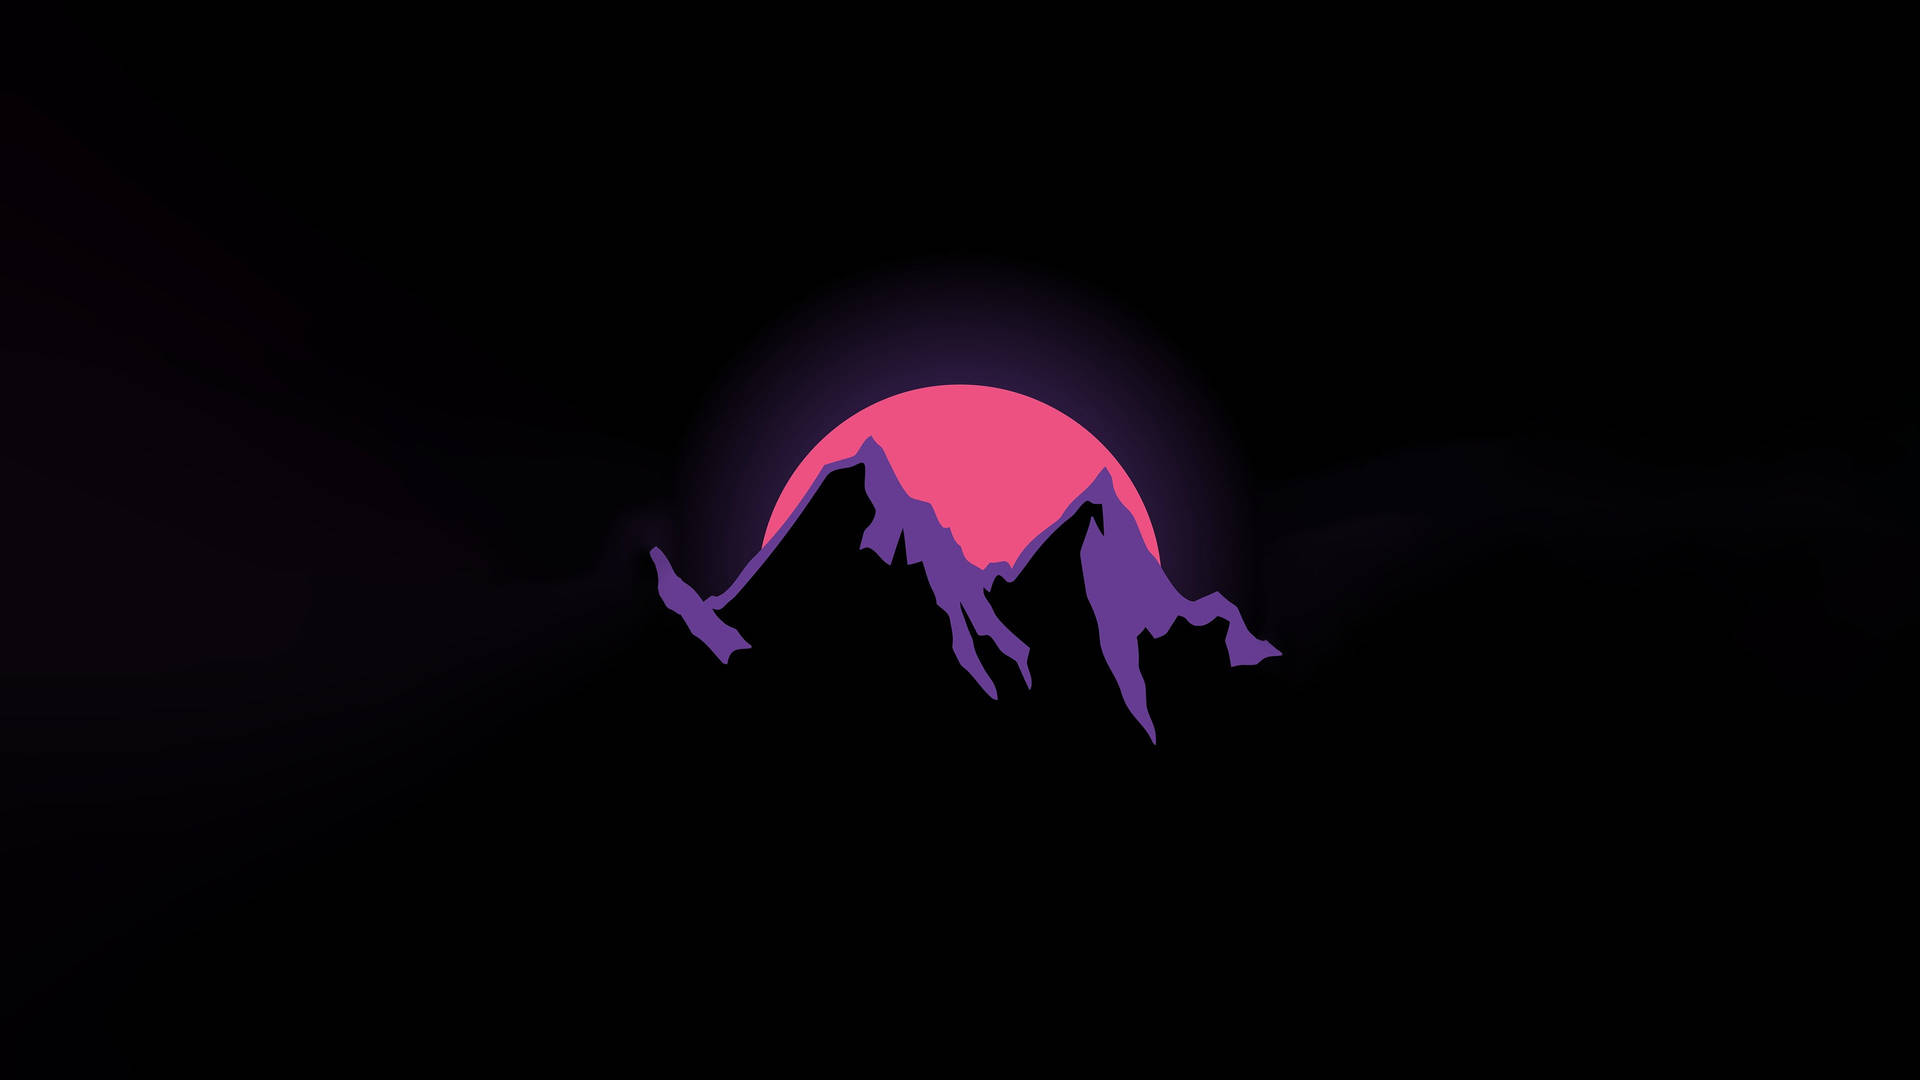 Dark Minimalist Mountains And The Moon Background